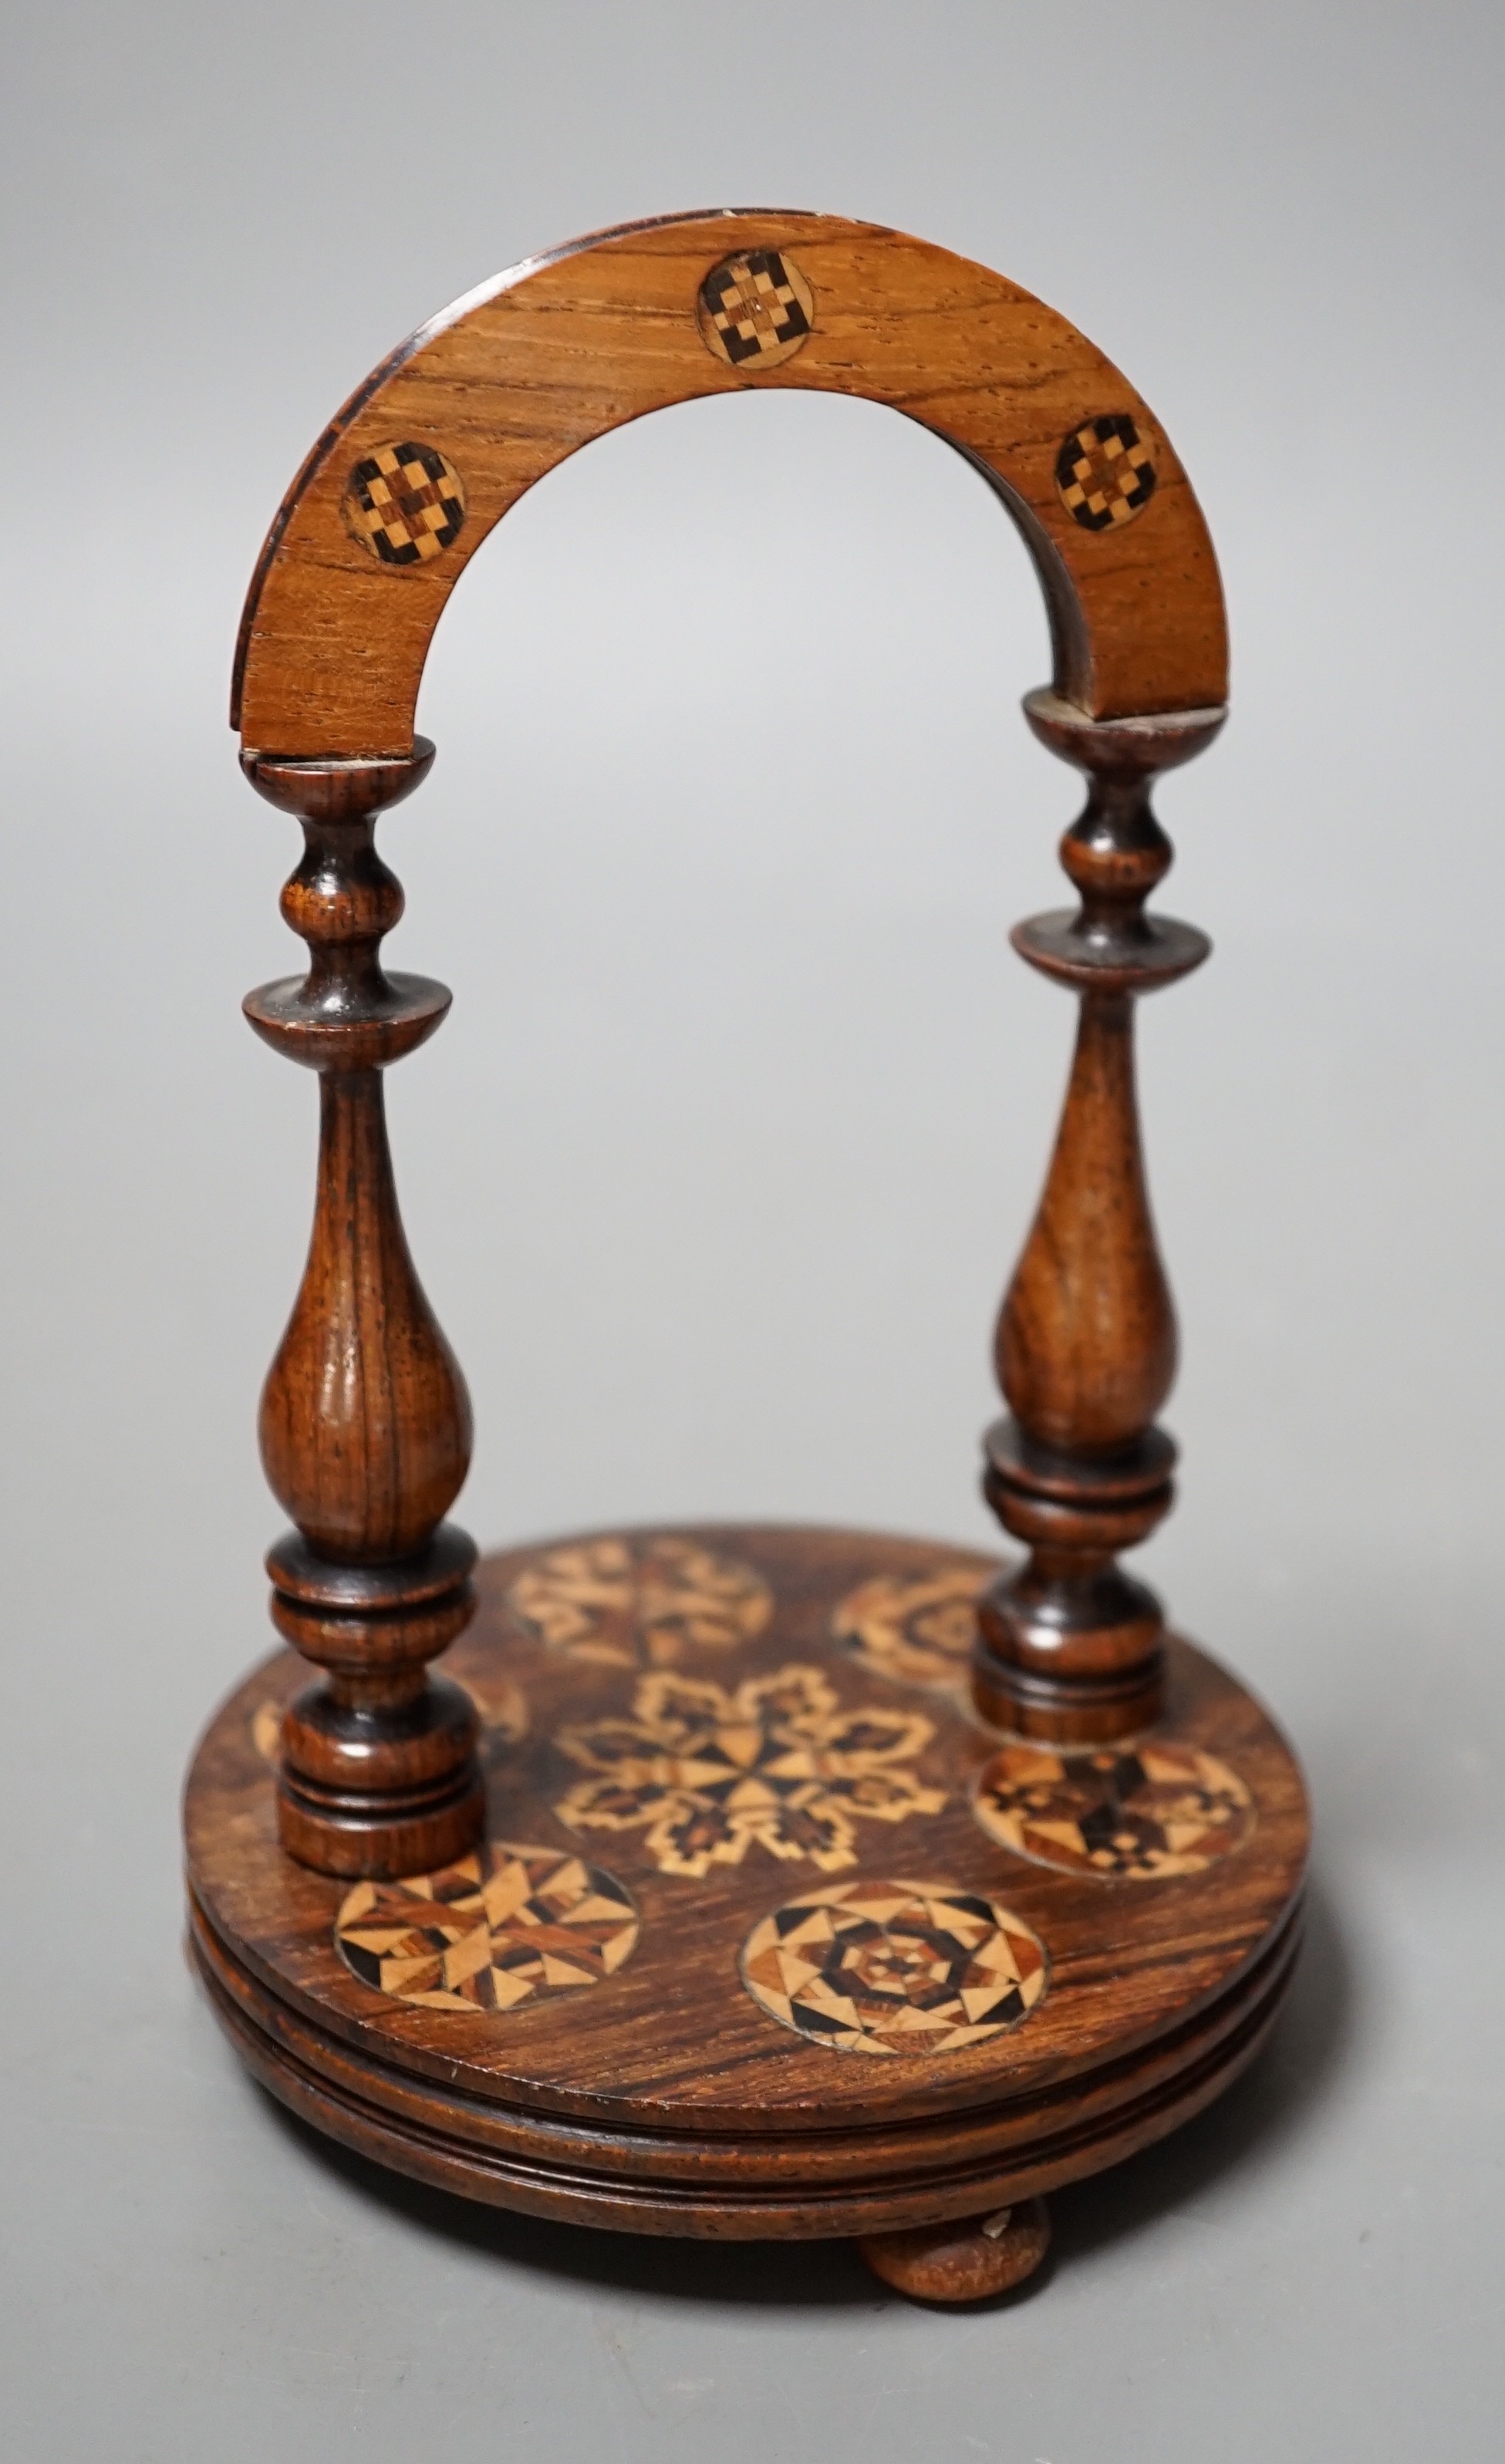 A Tunbridge ware rosewood and half square mosaic watchstand, c.1830-50, 16cm high